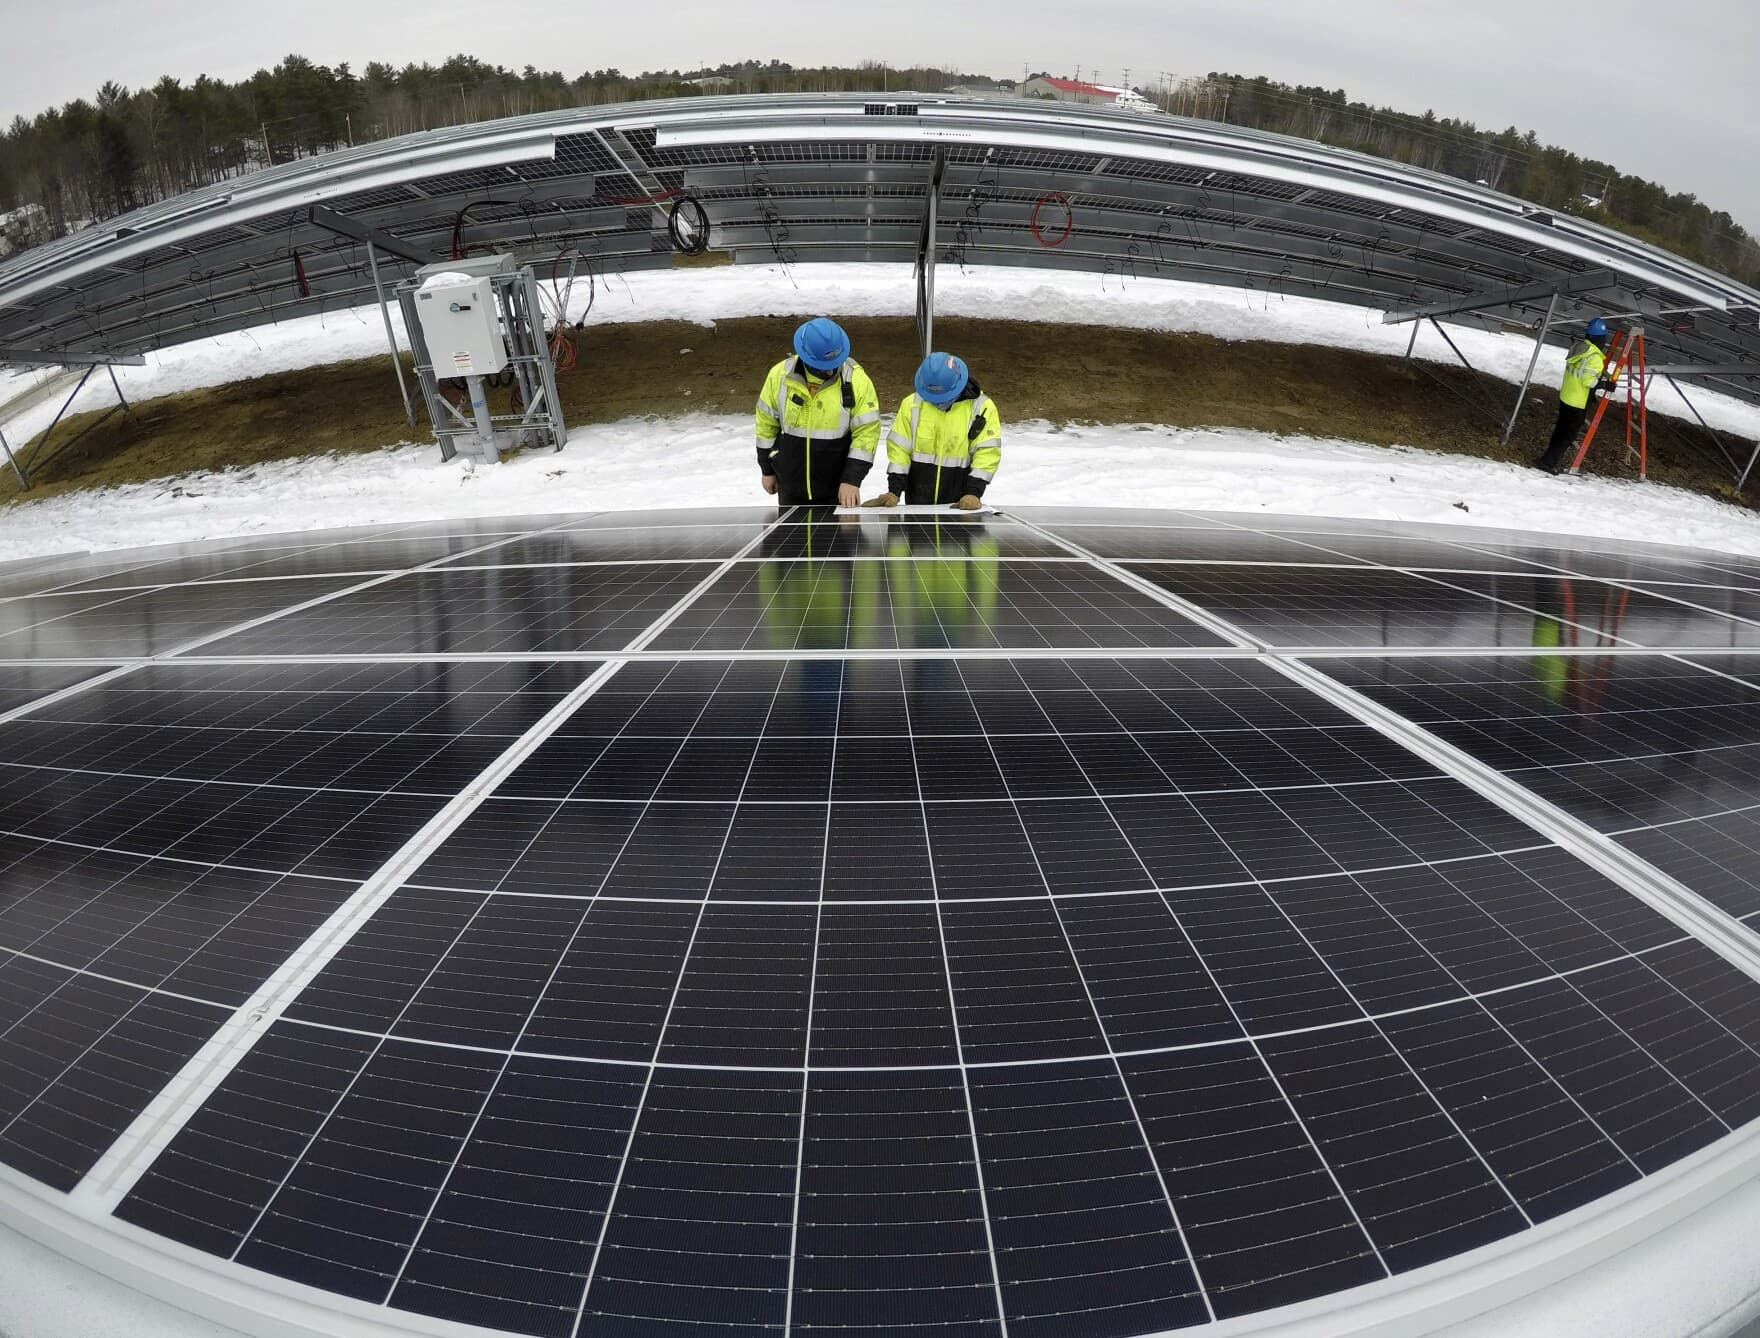 Electricians Bryan Driscoll and Zach Newton review a wiring schematic while installing solar panels at the 38-acre BNRG/Dirigo solar farm, Jan. 14, 2021, in Oxford, Maine. (Robert F. Bukaty/AP)